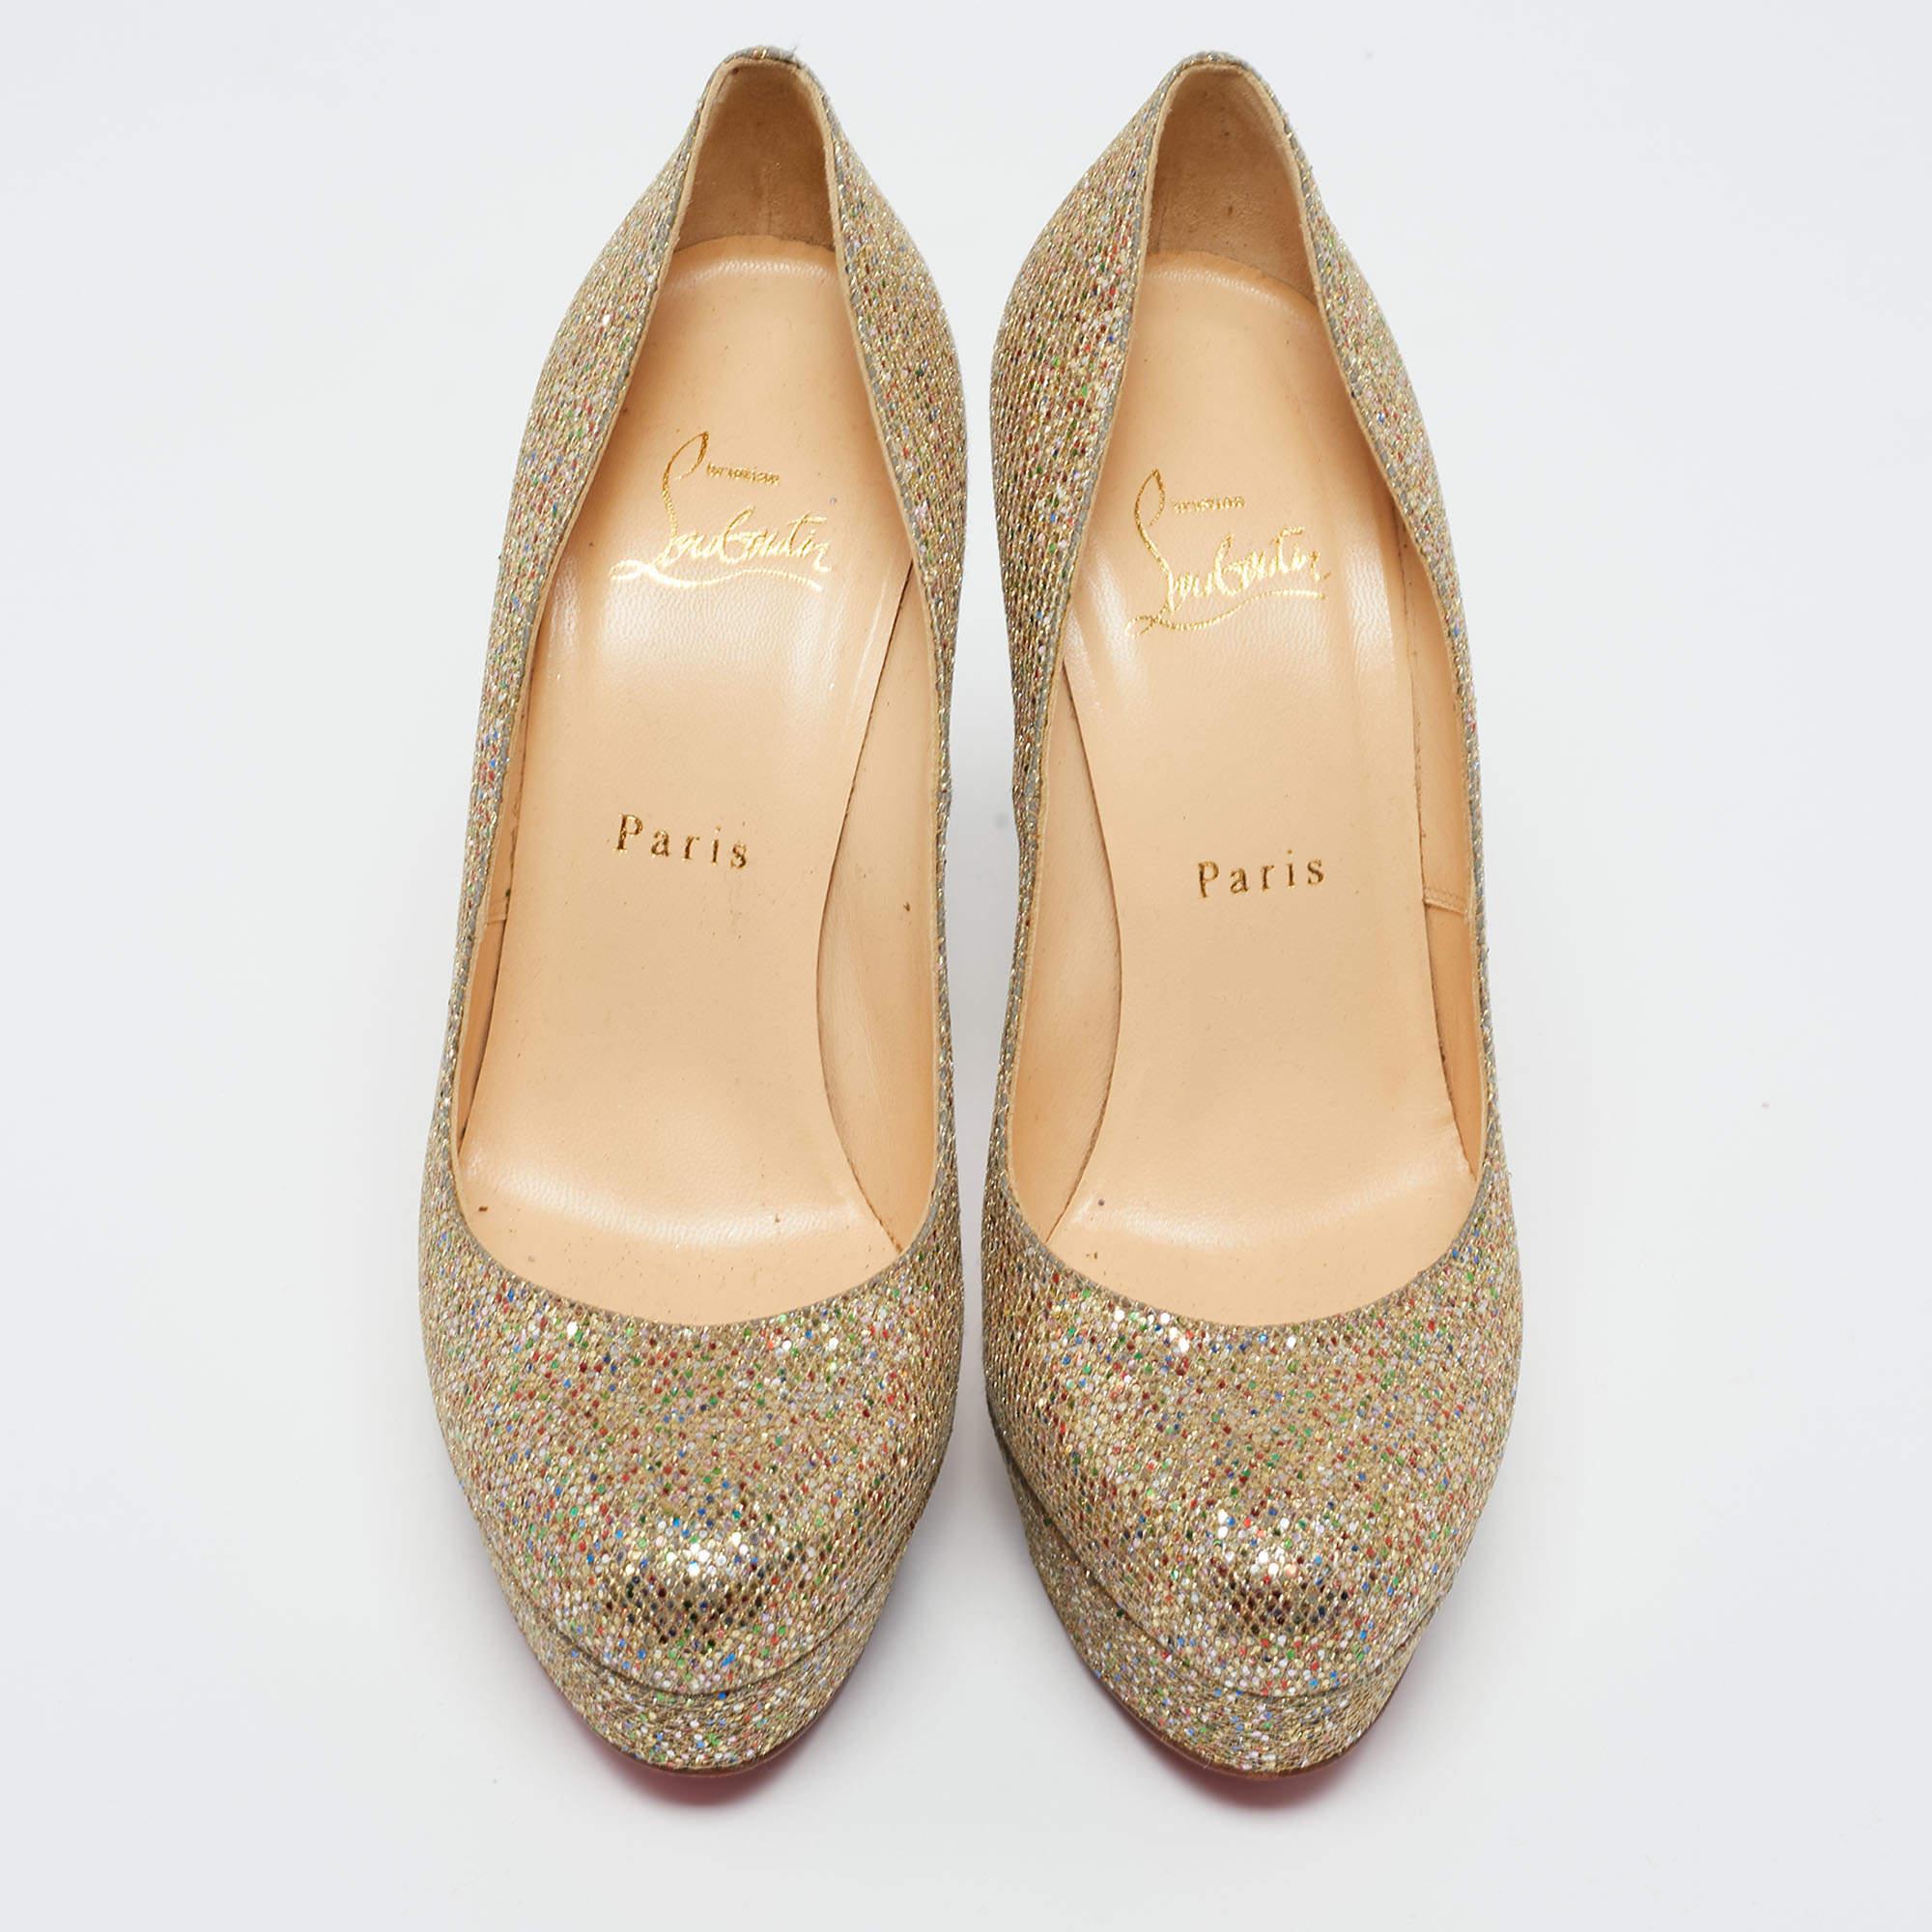 Feel glamorous every time you slip into this glitzy pair by Christian Louboutin. Covered in gold glitter and balanced on platforms and 12.5 cm heels, these pumps will be a winner with all your well-tailored outfits. They are finished with the